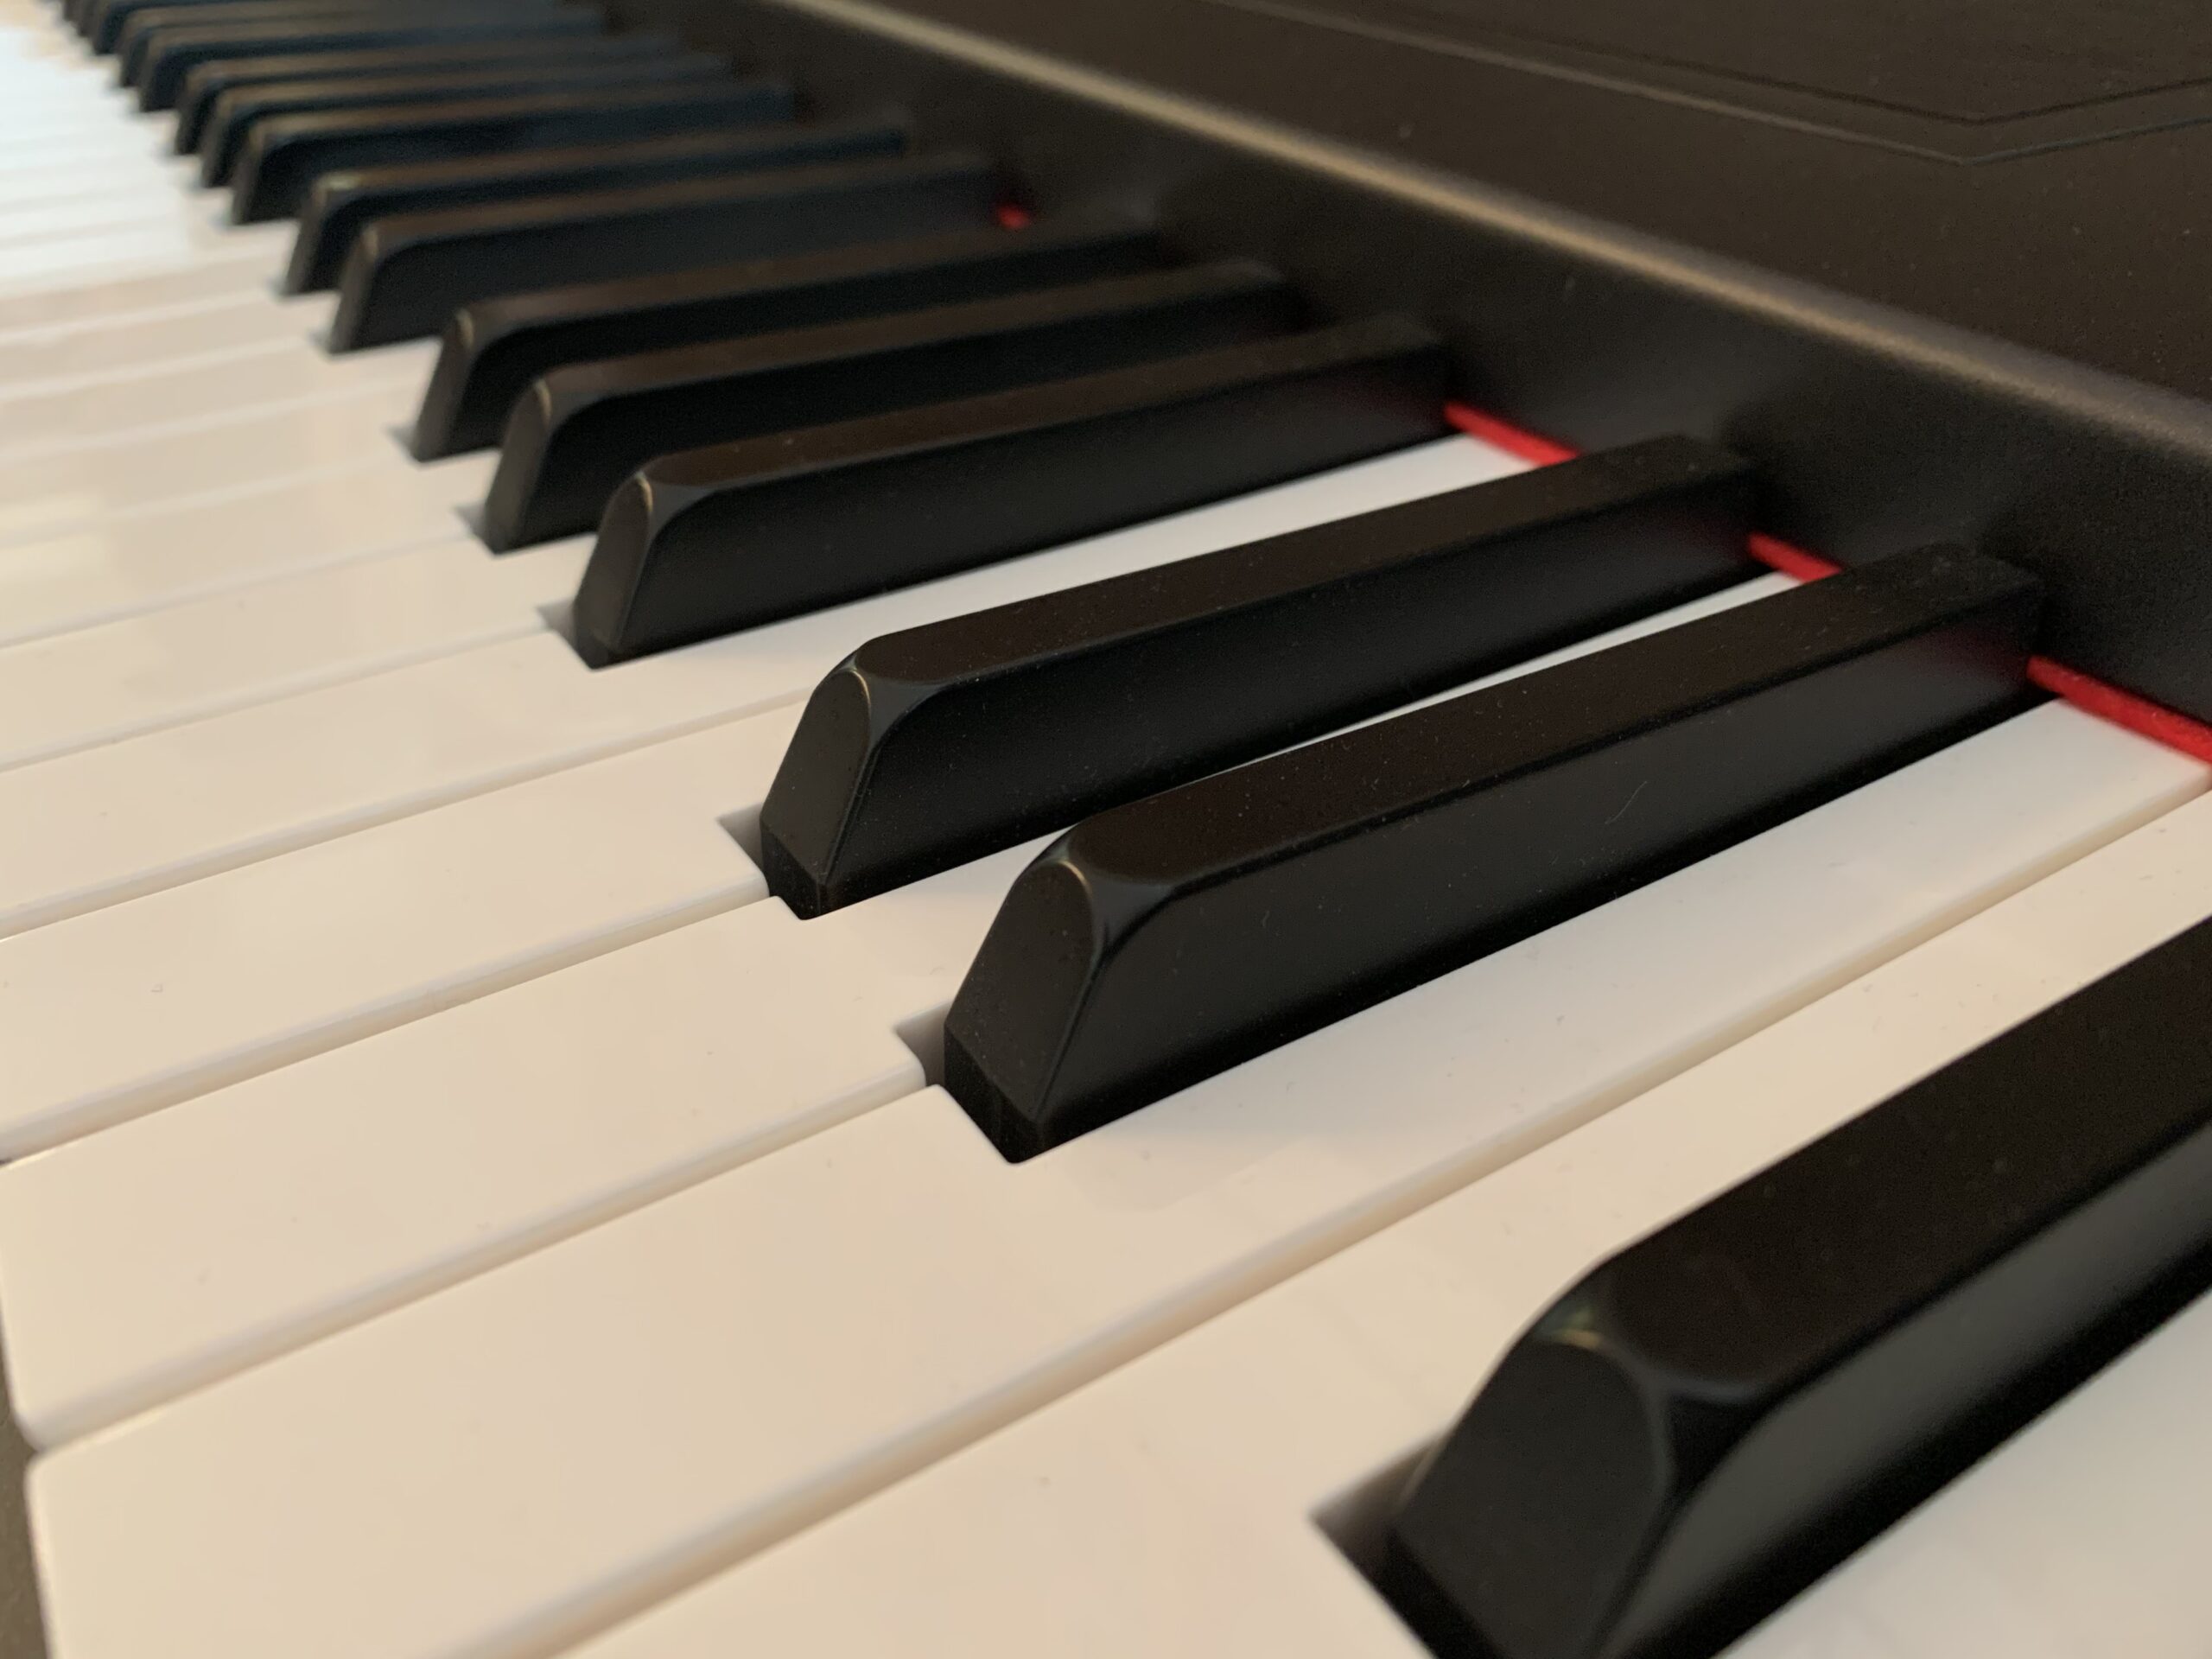 Donner DDP-80 Digital Piano [Product Review] 